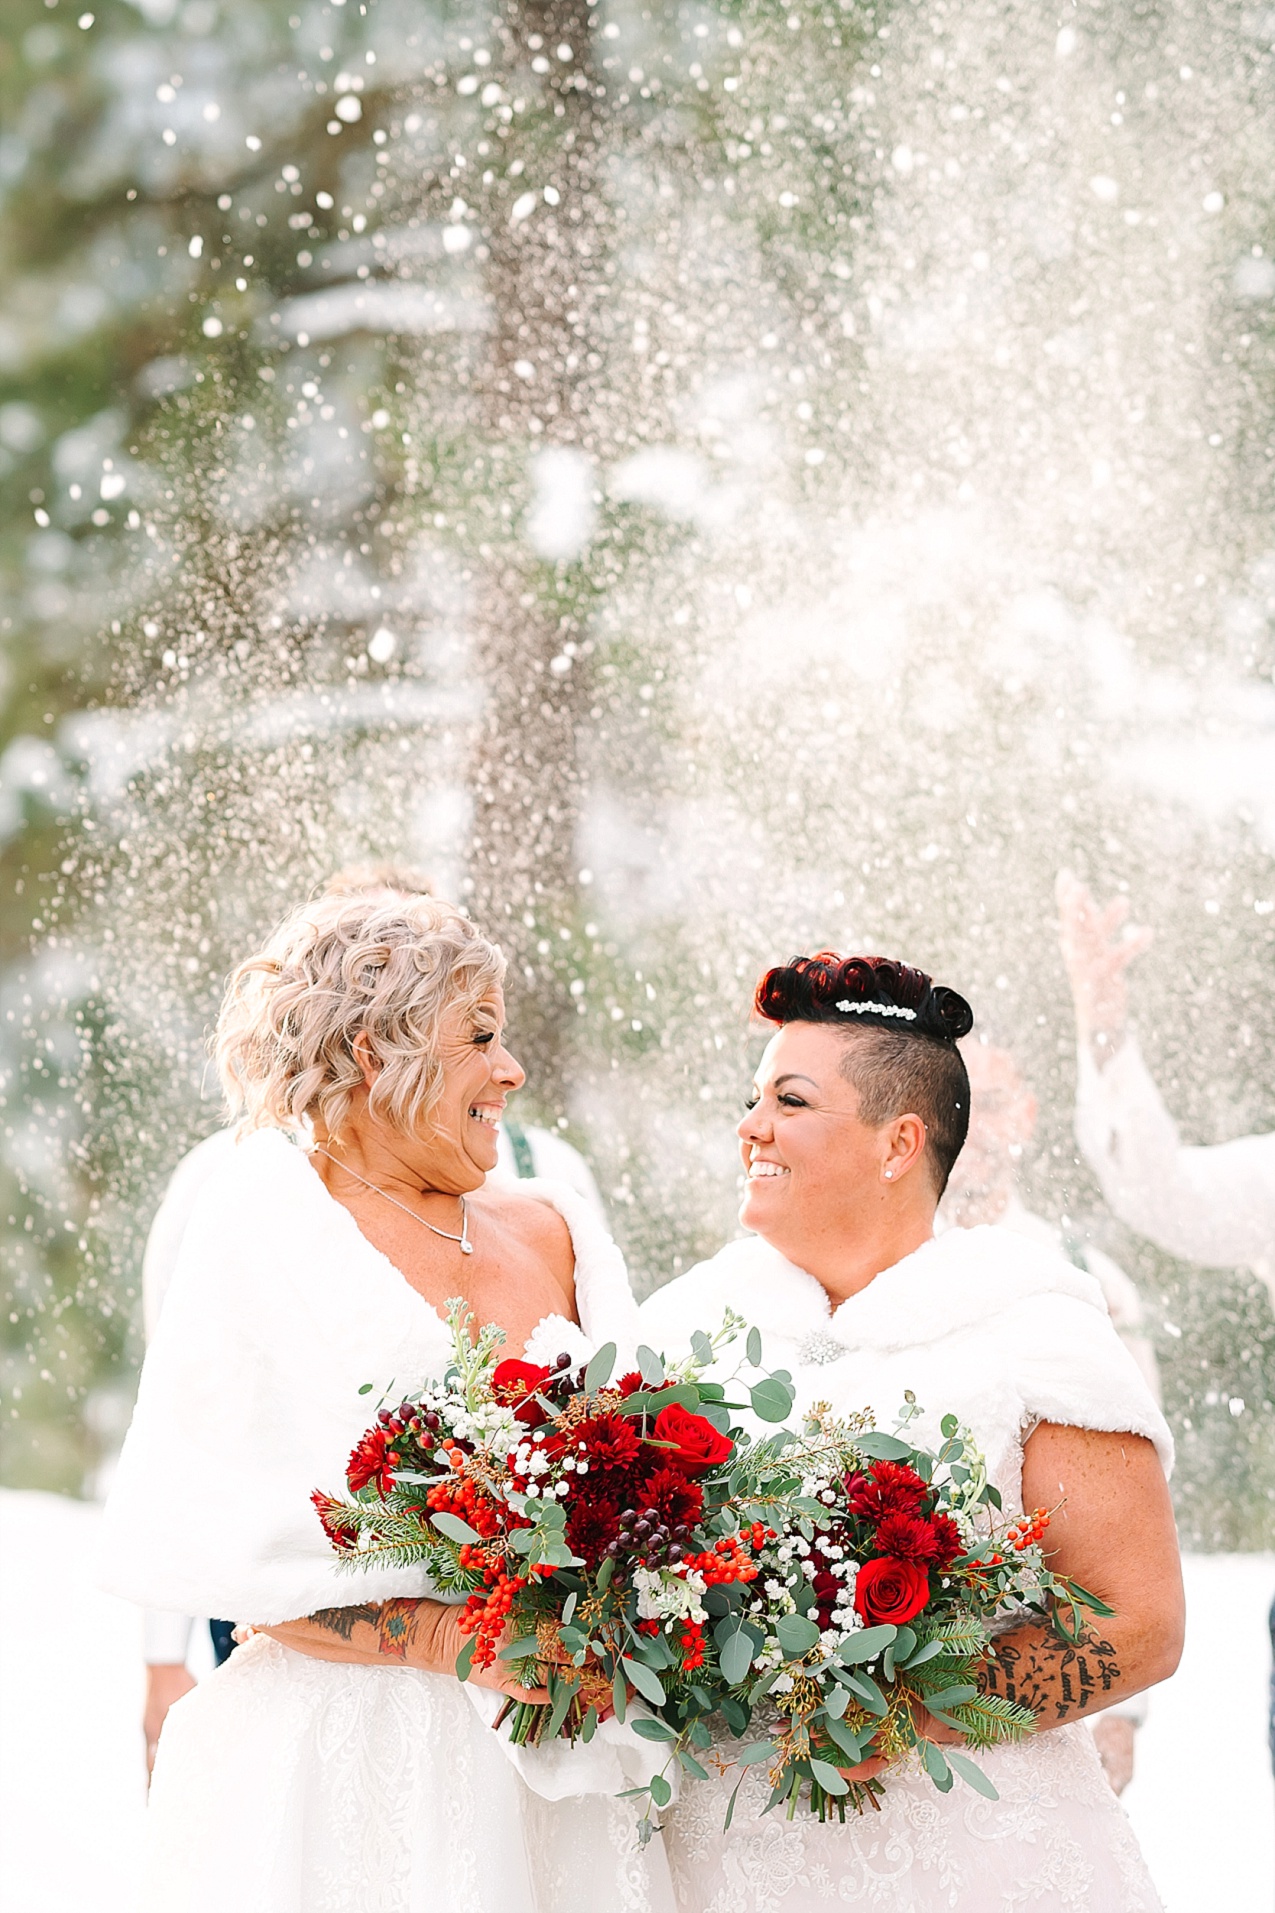 Wintery Pine River Ranch Wedding brides standing while bridesmen throw slow in the air